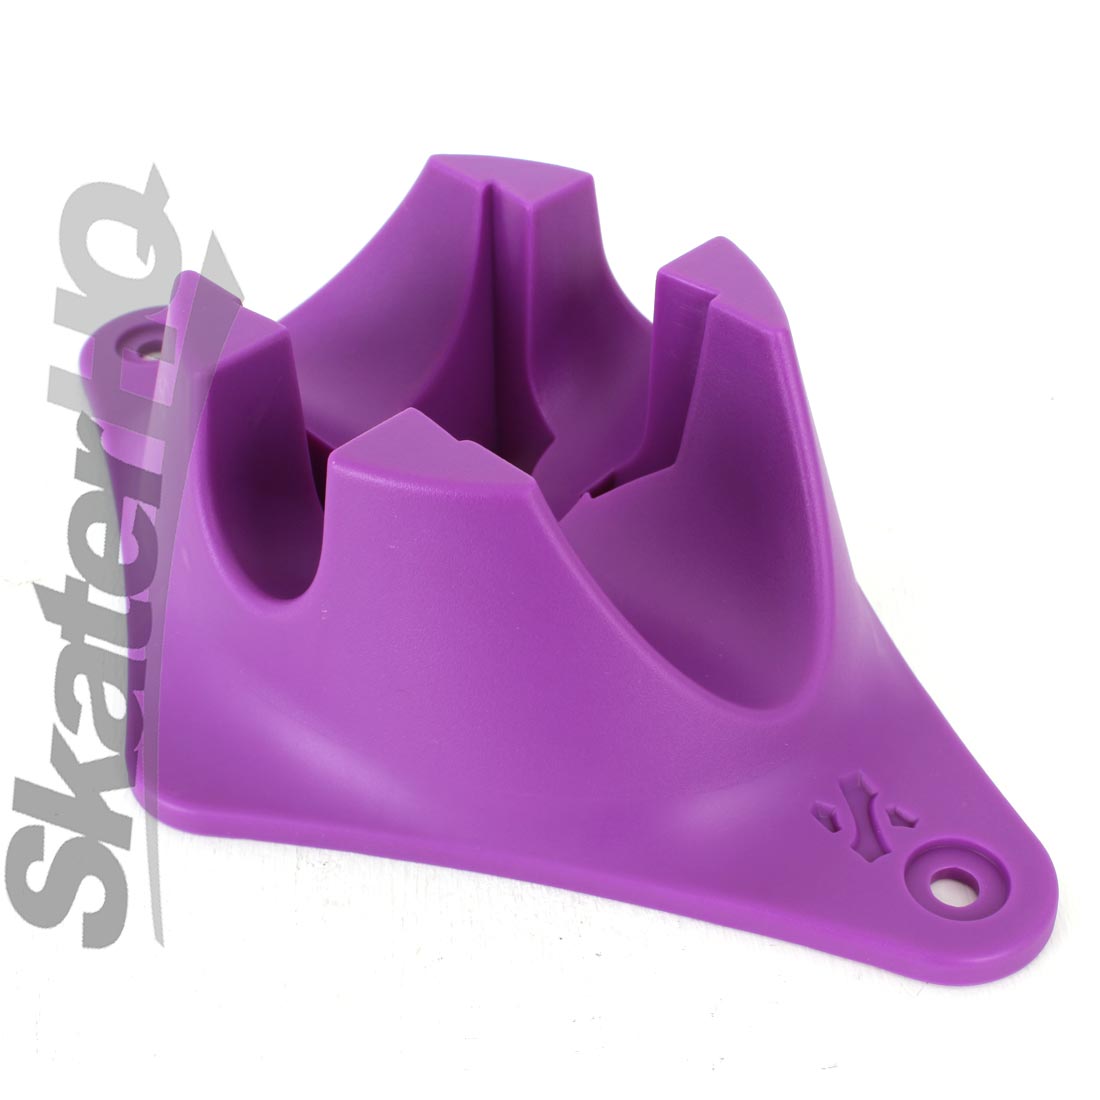 Sacrifice Scooter Stand - Purple Scooter Accessories